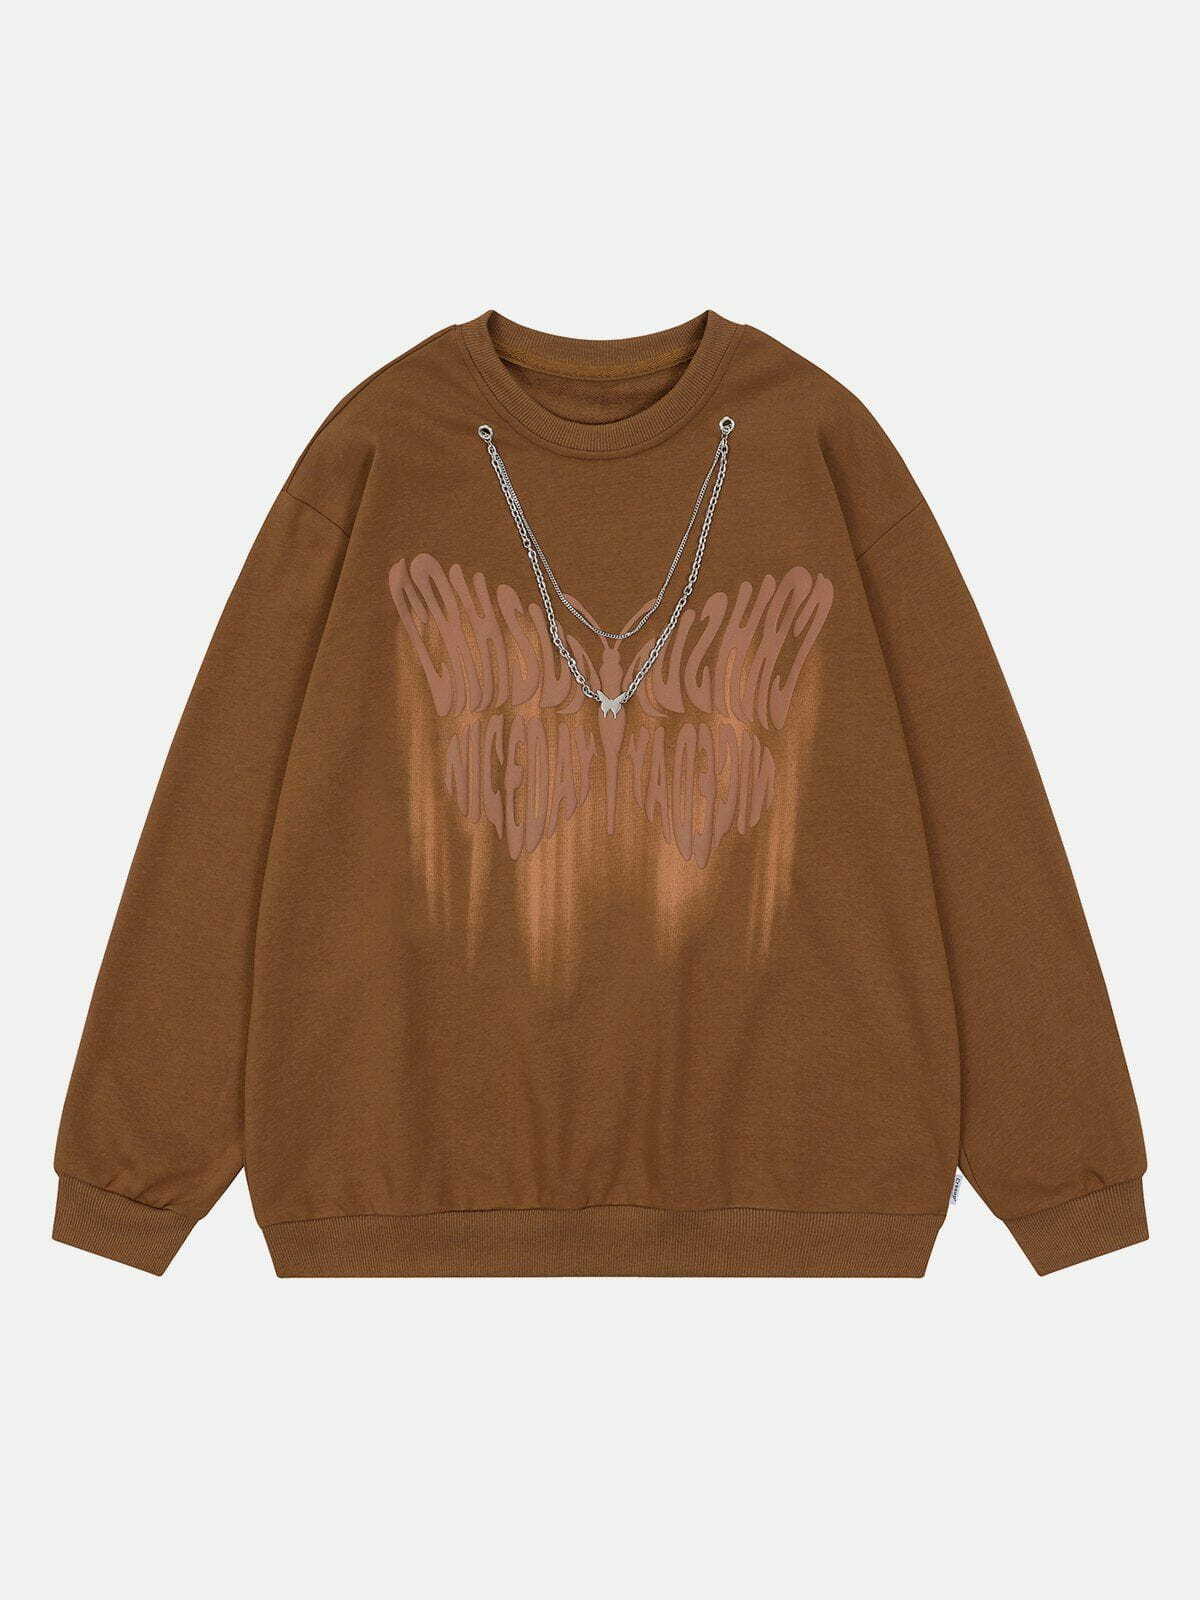 luminous butterfly necklace sweatshirt quirky y2k fashion icon 5617